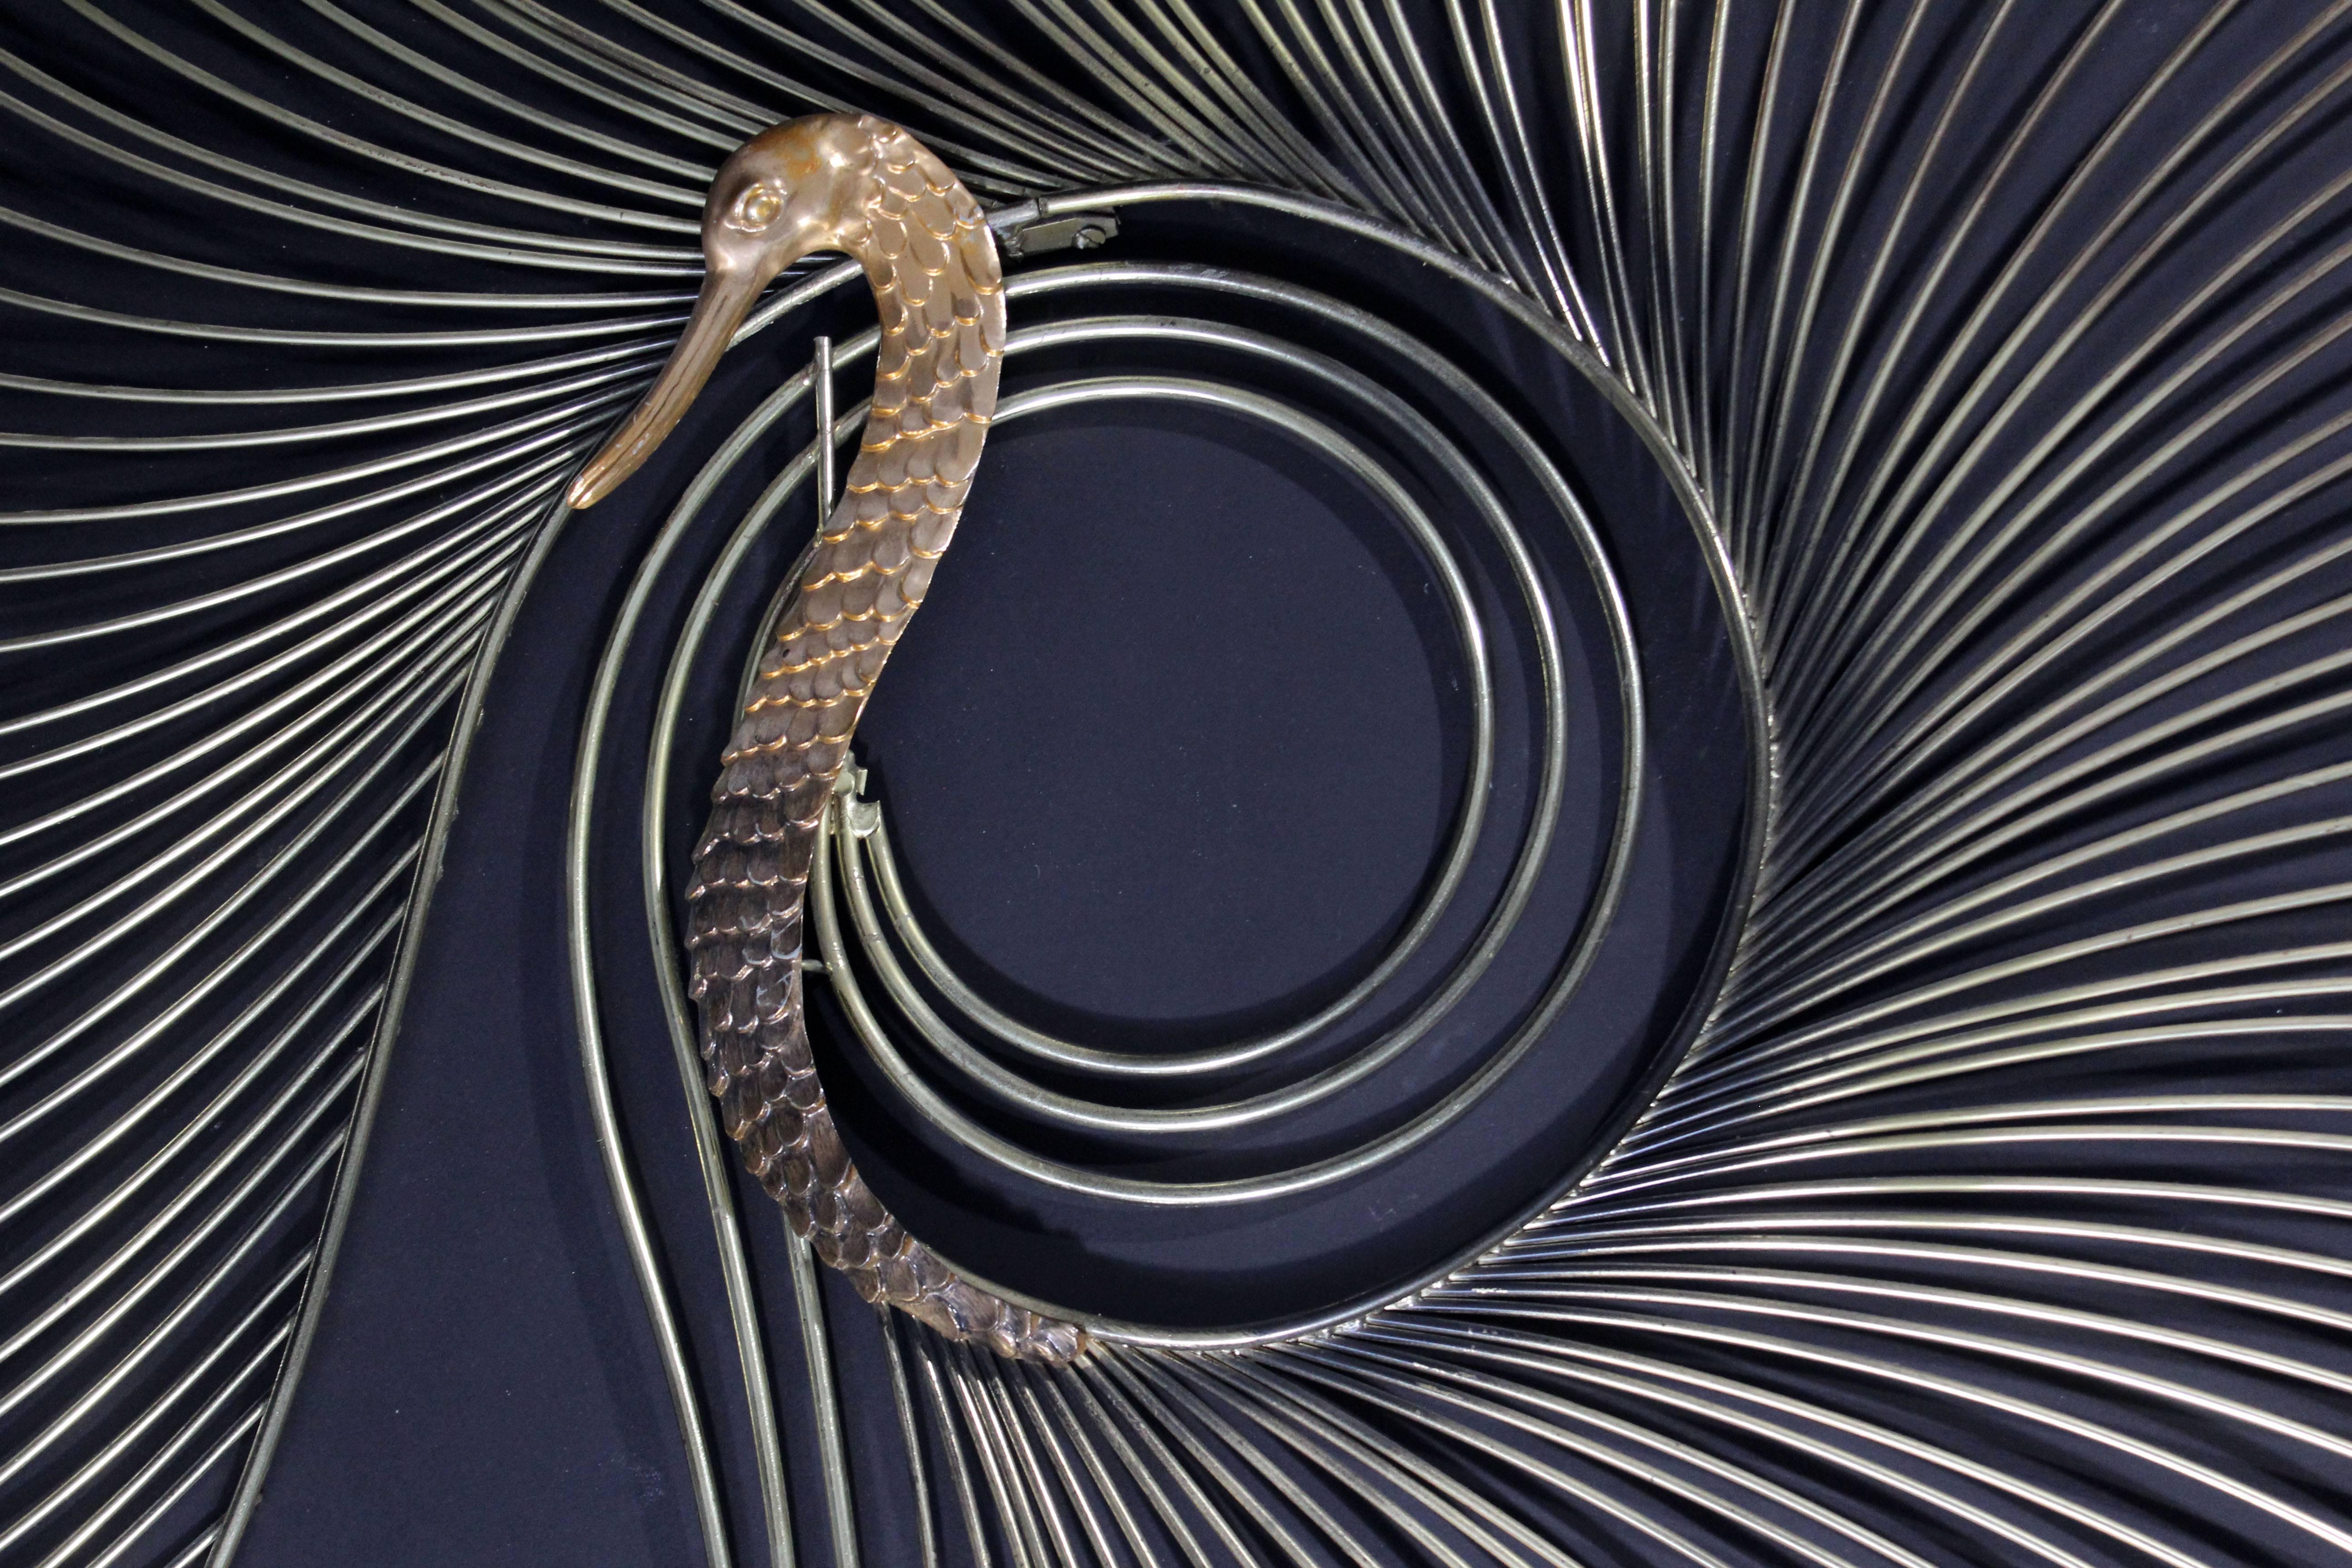 American Contemporary Modern Jere Large Brass Peacock Hanging Wall Sculpture 1980s Signed